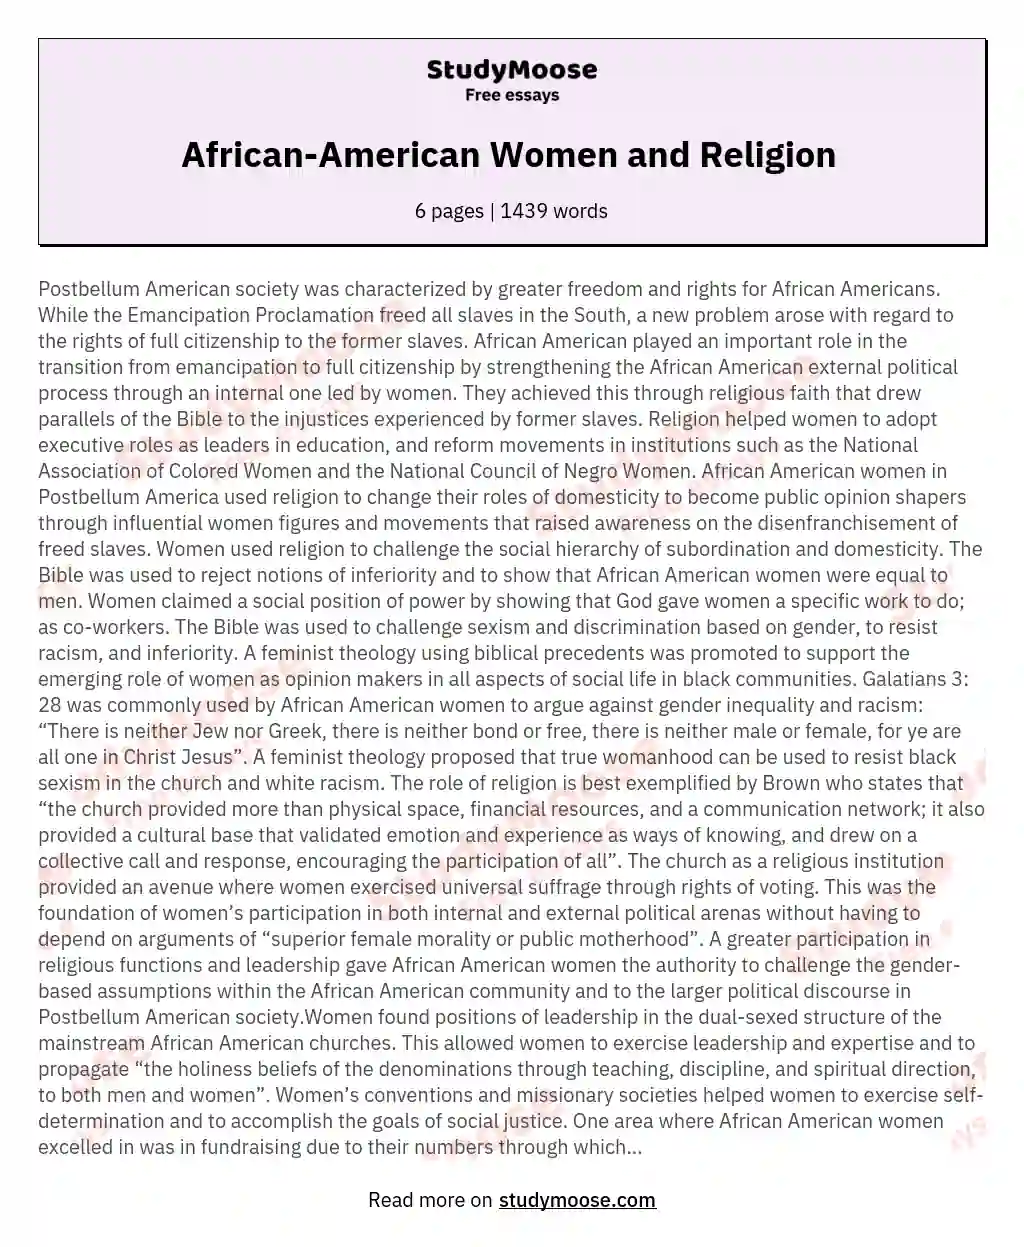 African-American Women and Religion  essay